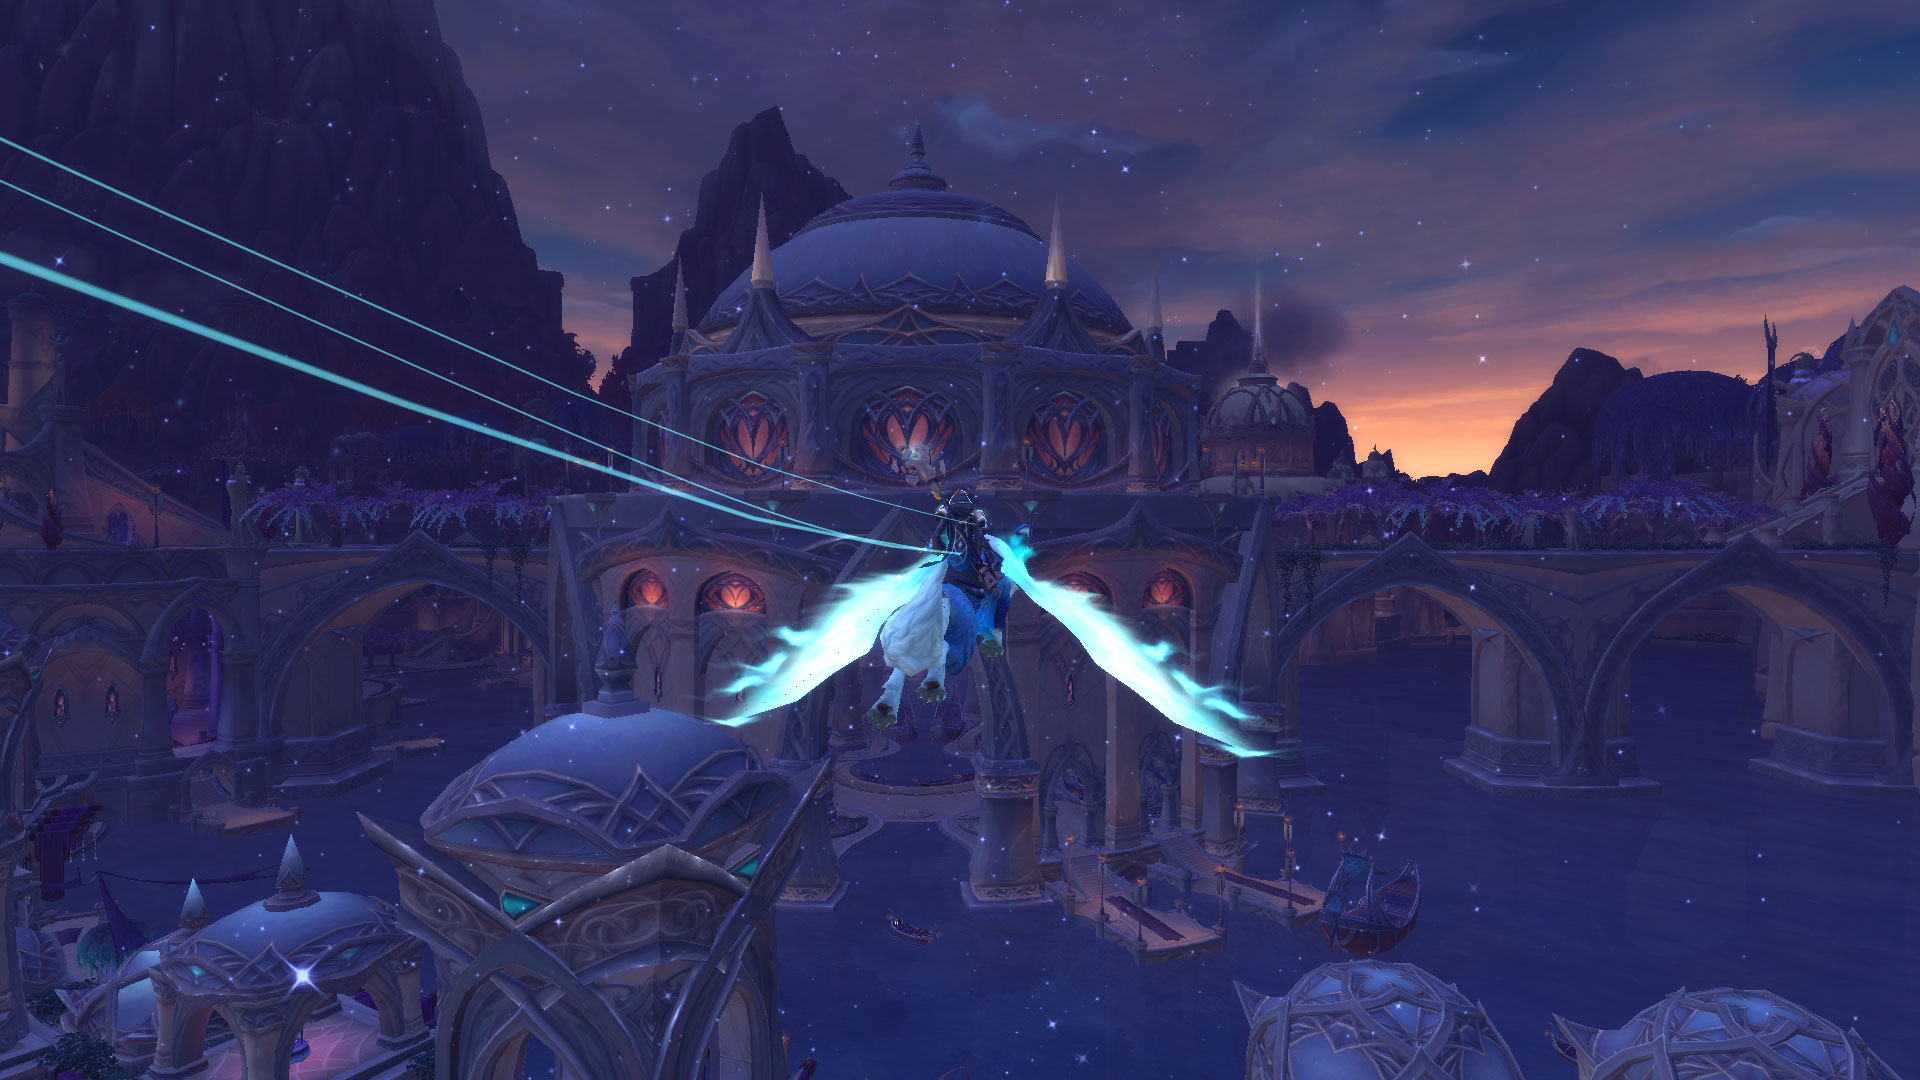 WoW Suramar City - the city's storyline offers captivating lore and quest rewards